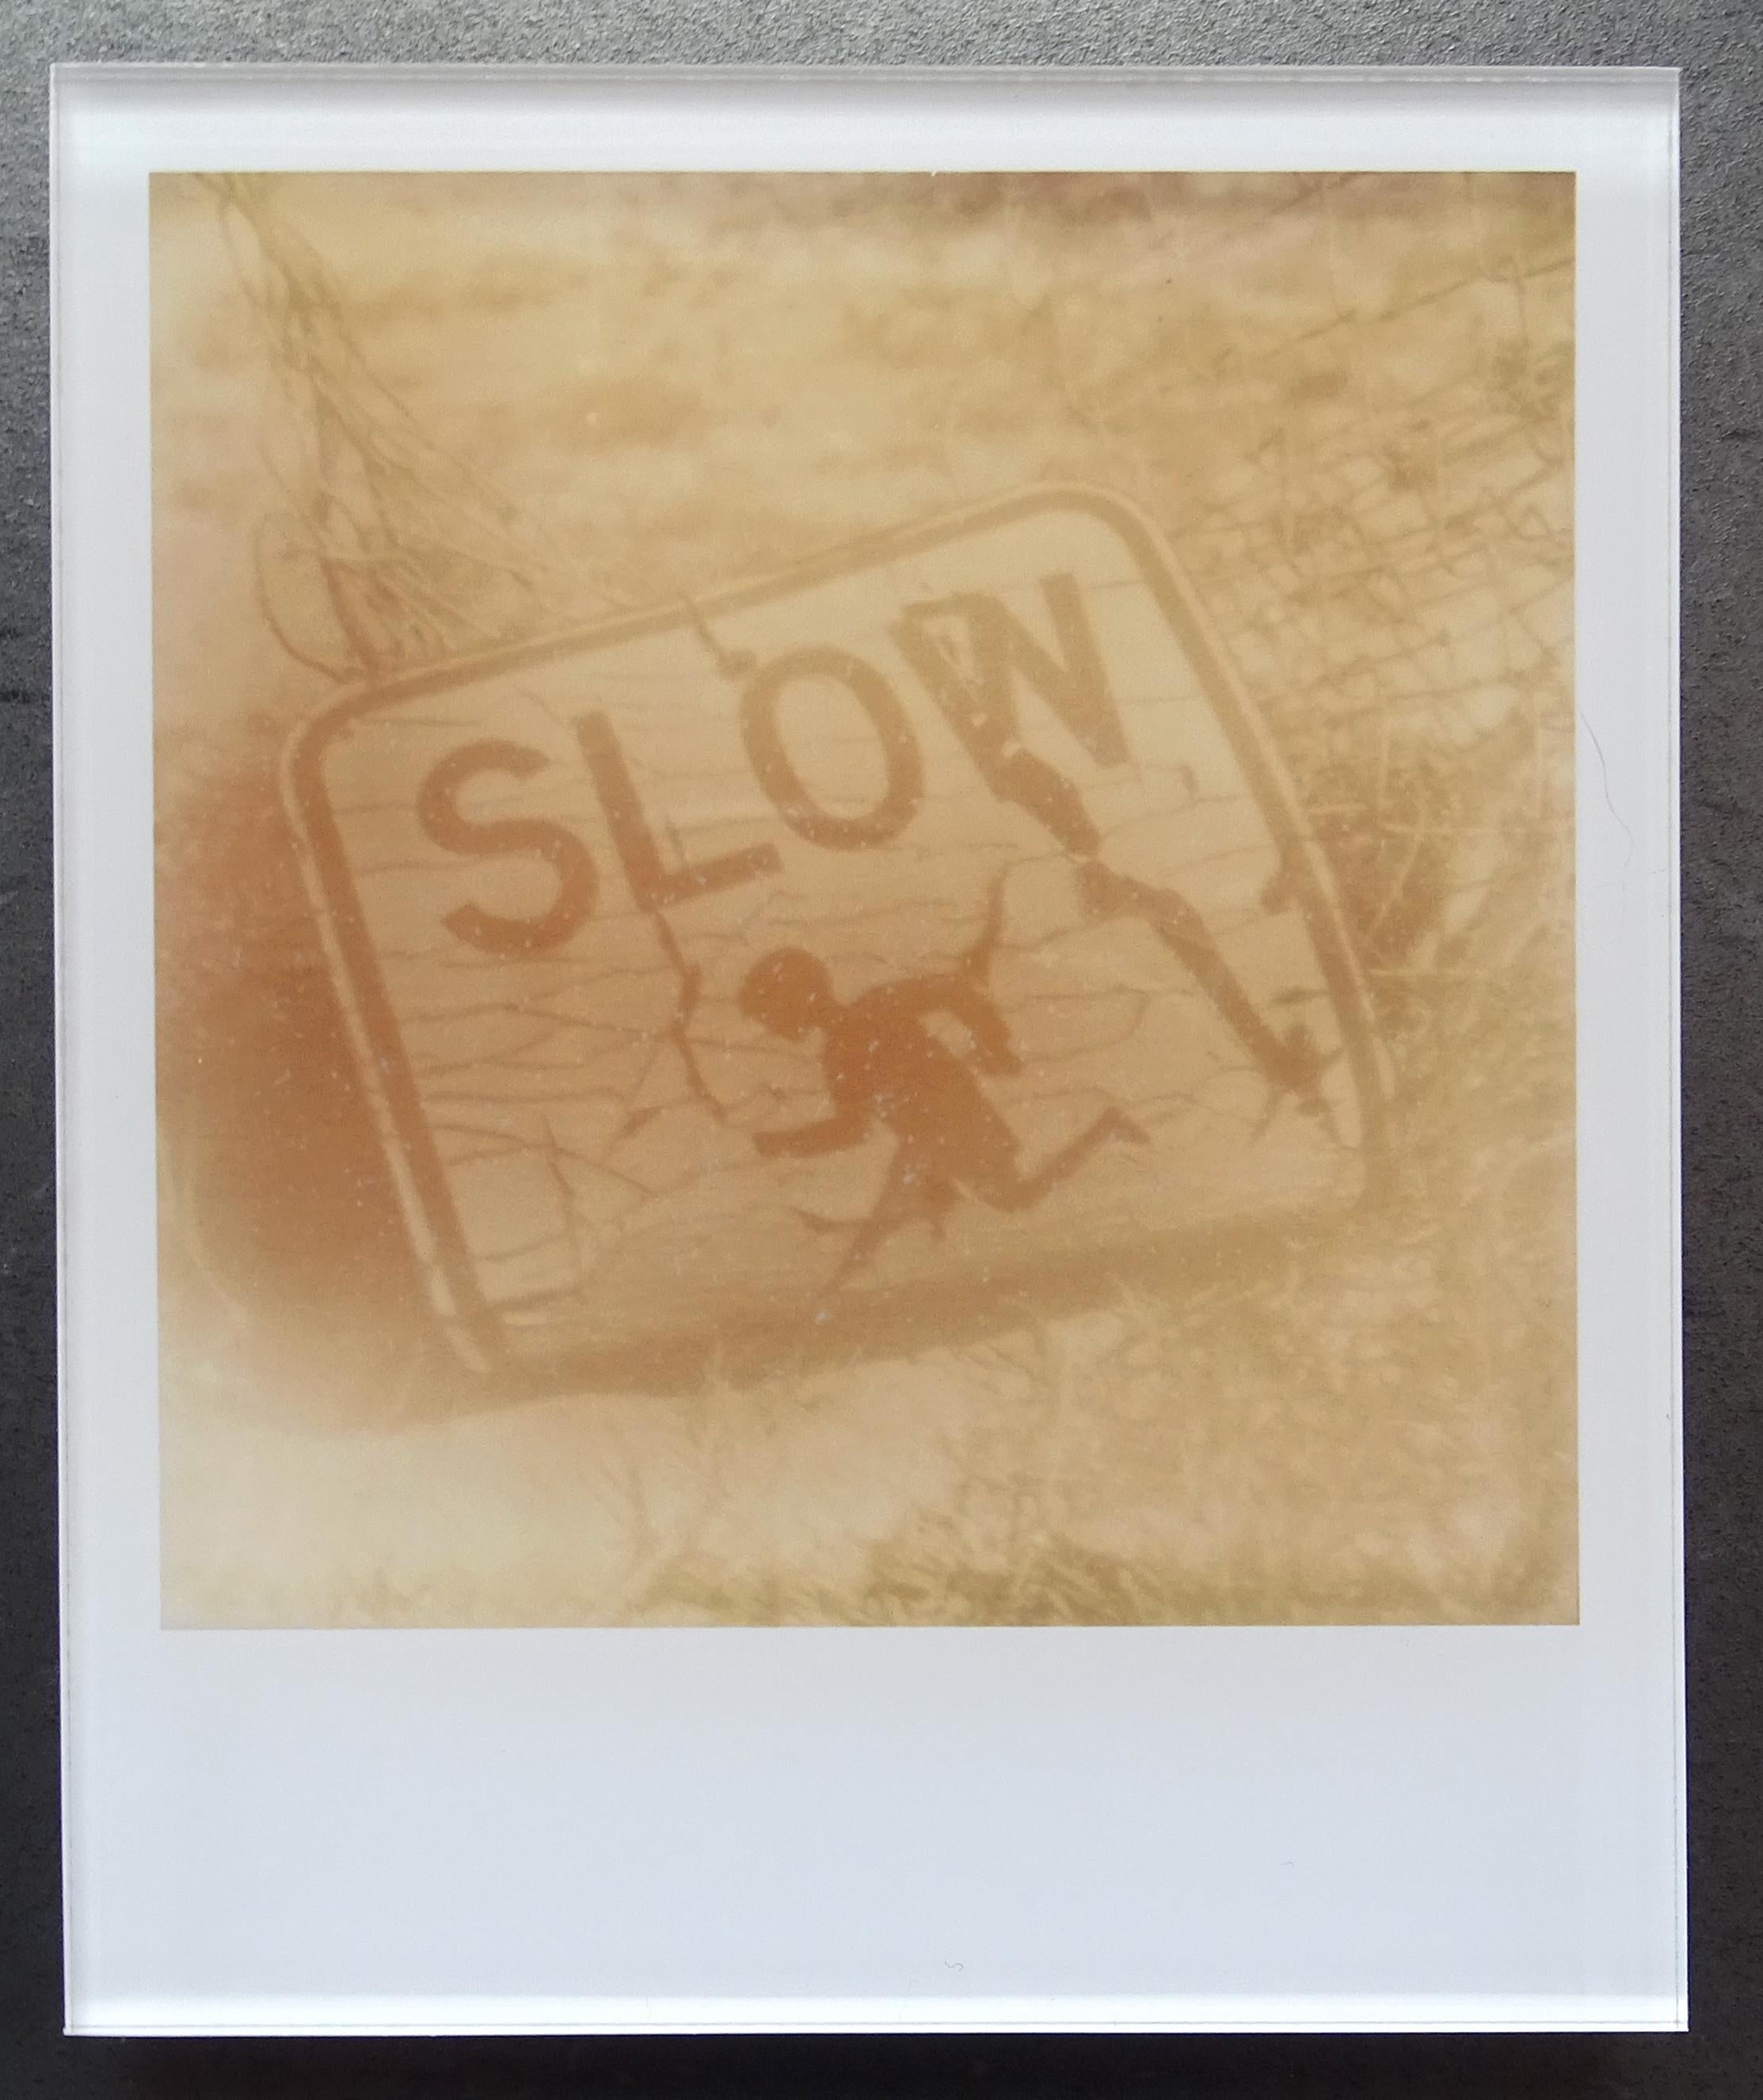 Stefanie Schneider's Minis
Slow (Oxana's 30th Birthday), 2008

Signed and signature brand on verso.
Lambda digital Color Photographs based on a Polaroid.
Sandwiched in between Plexiglass (thickness 0.7cm)

Polaroid sized open Editions 1999-2013
10.7